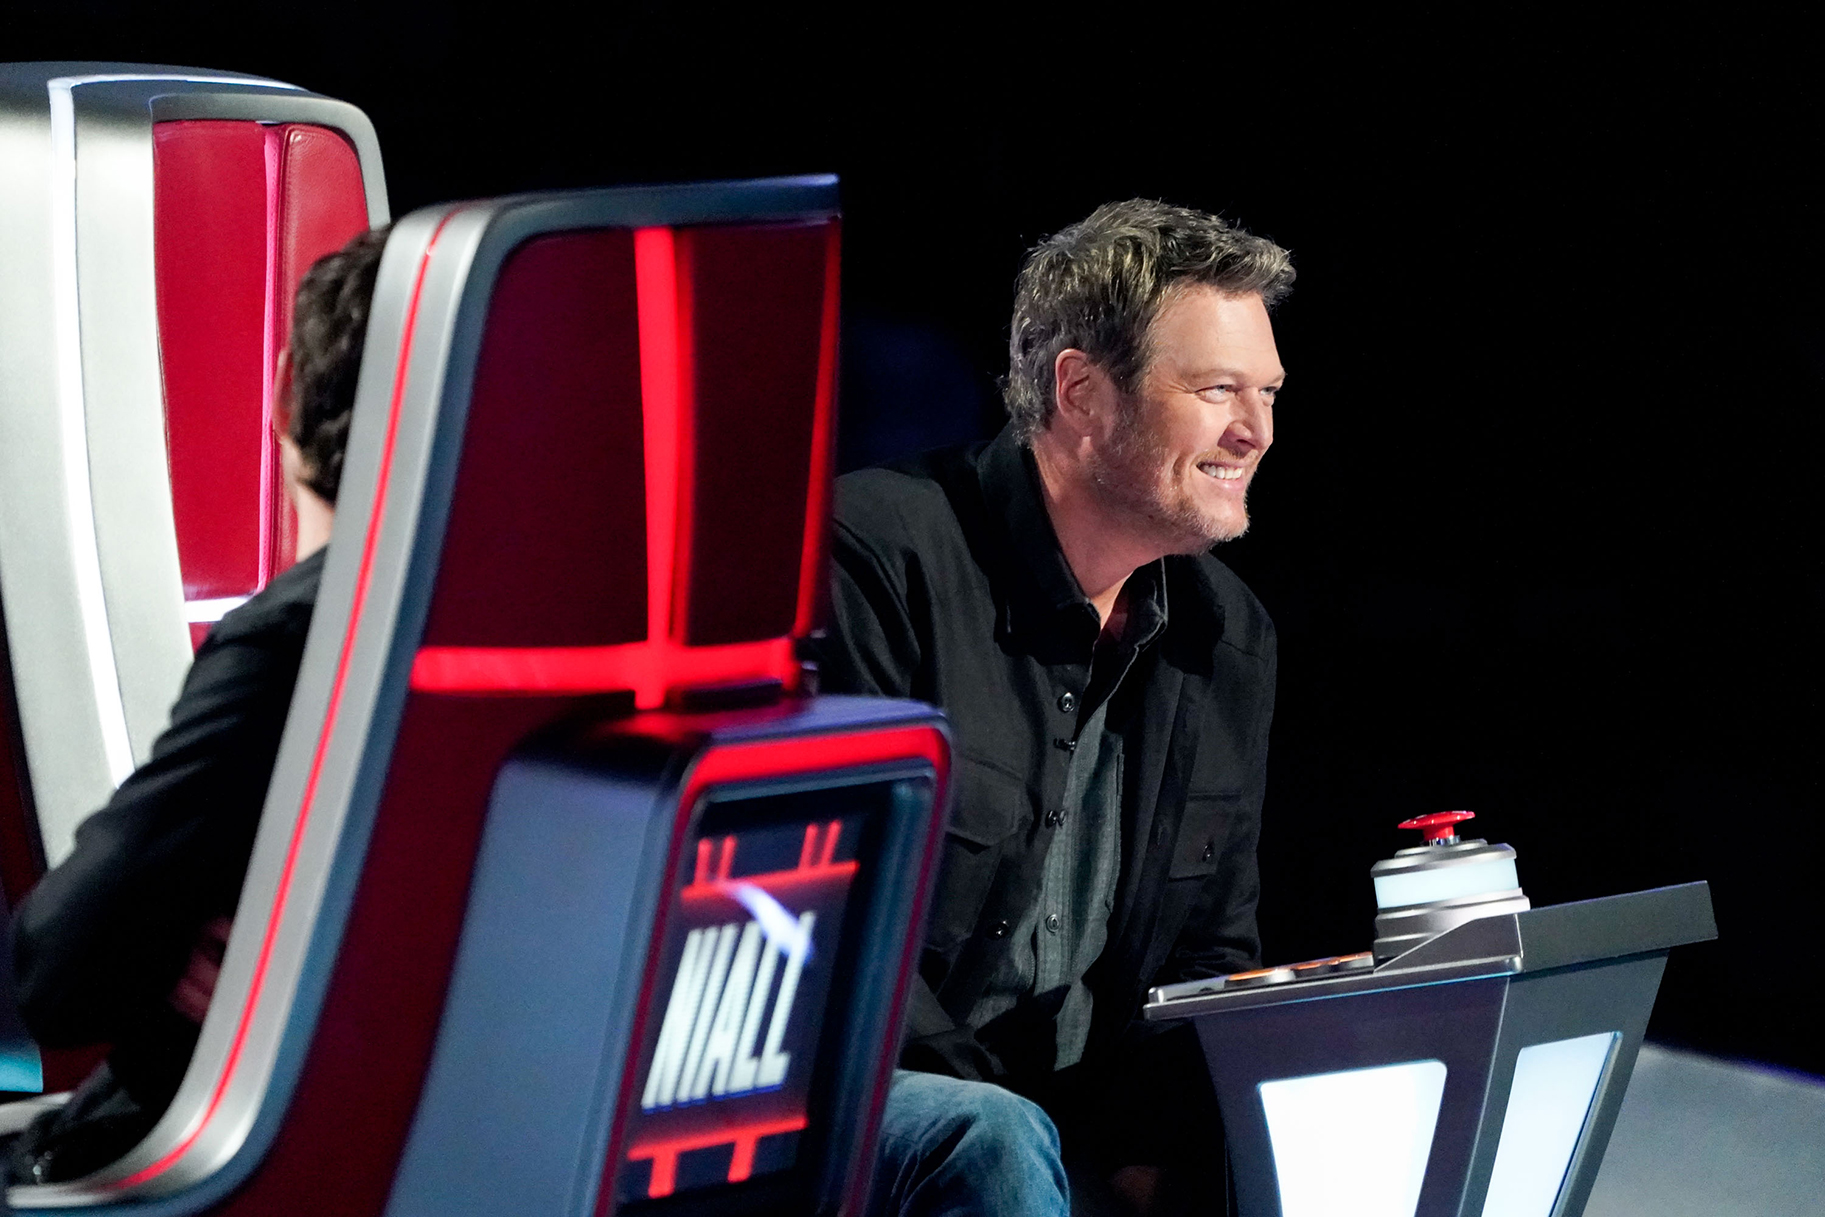 Blake Shelton on The Voice Blind Auditions